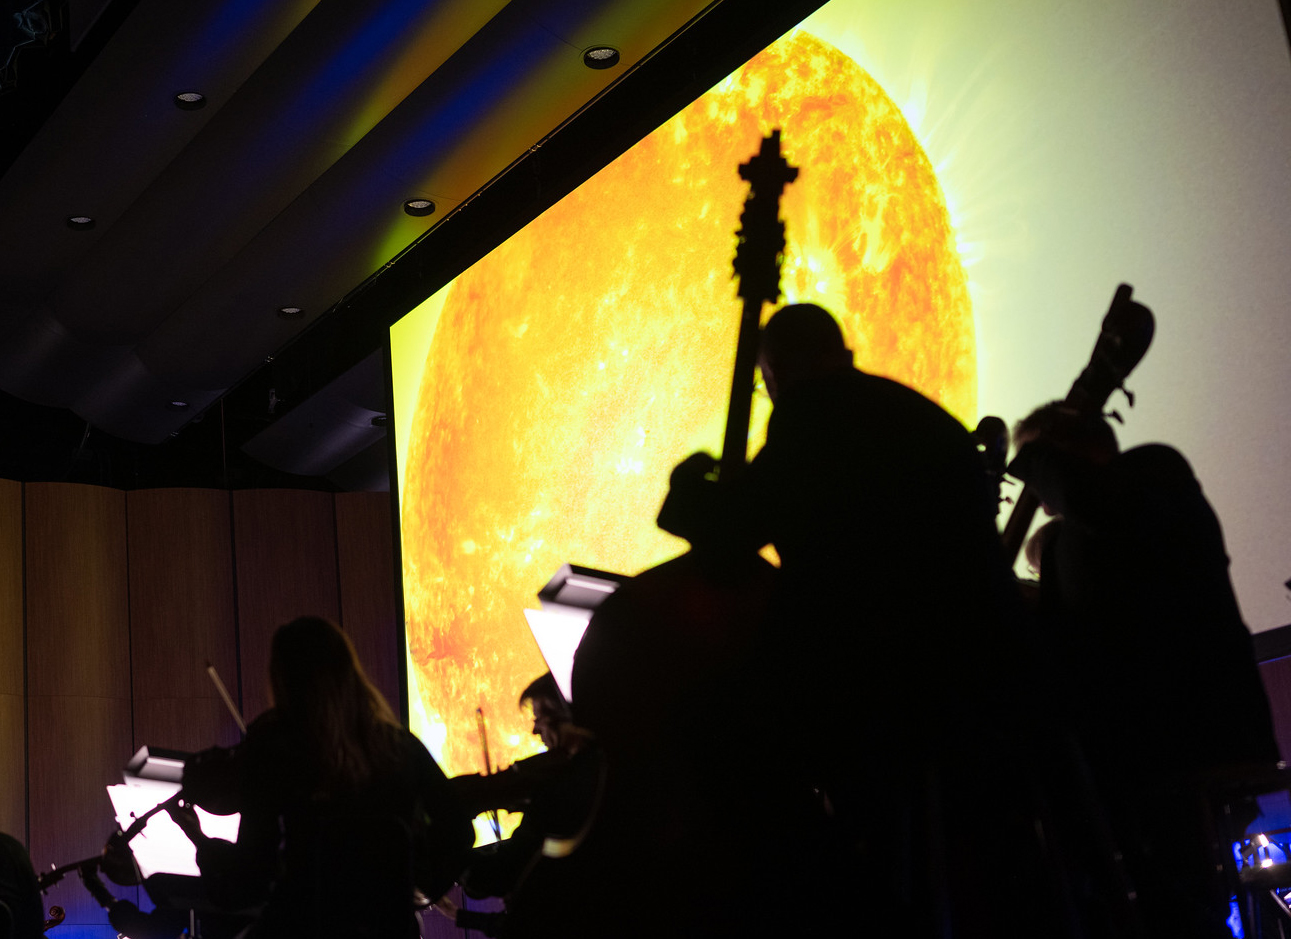 National Philharmonic playing with NASA imagery of the Sun in the background.